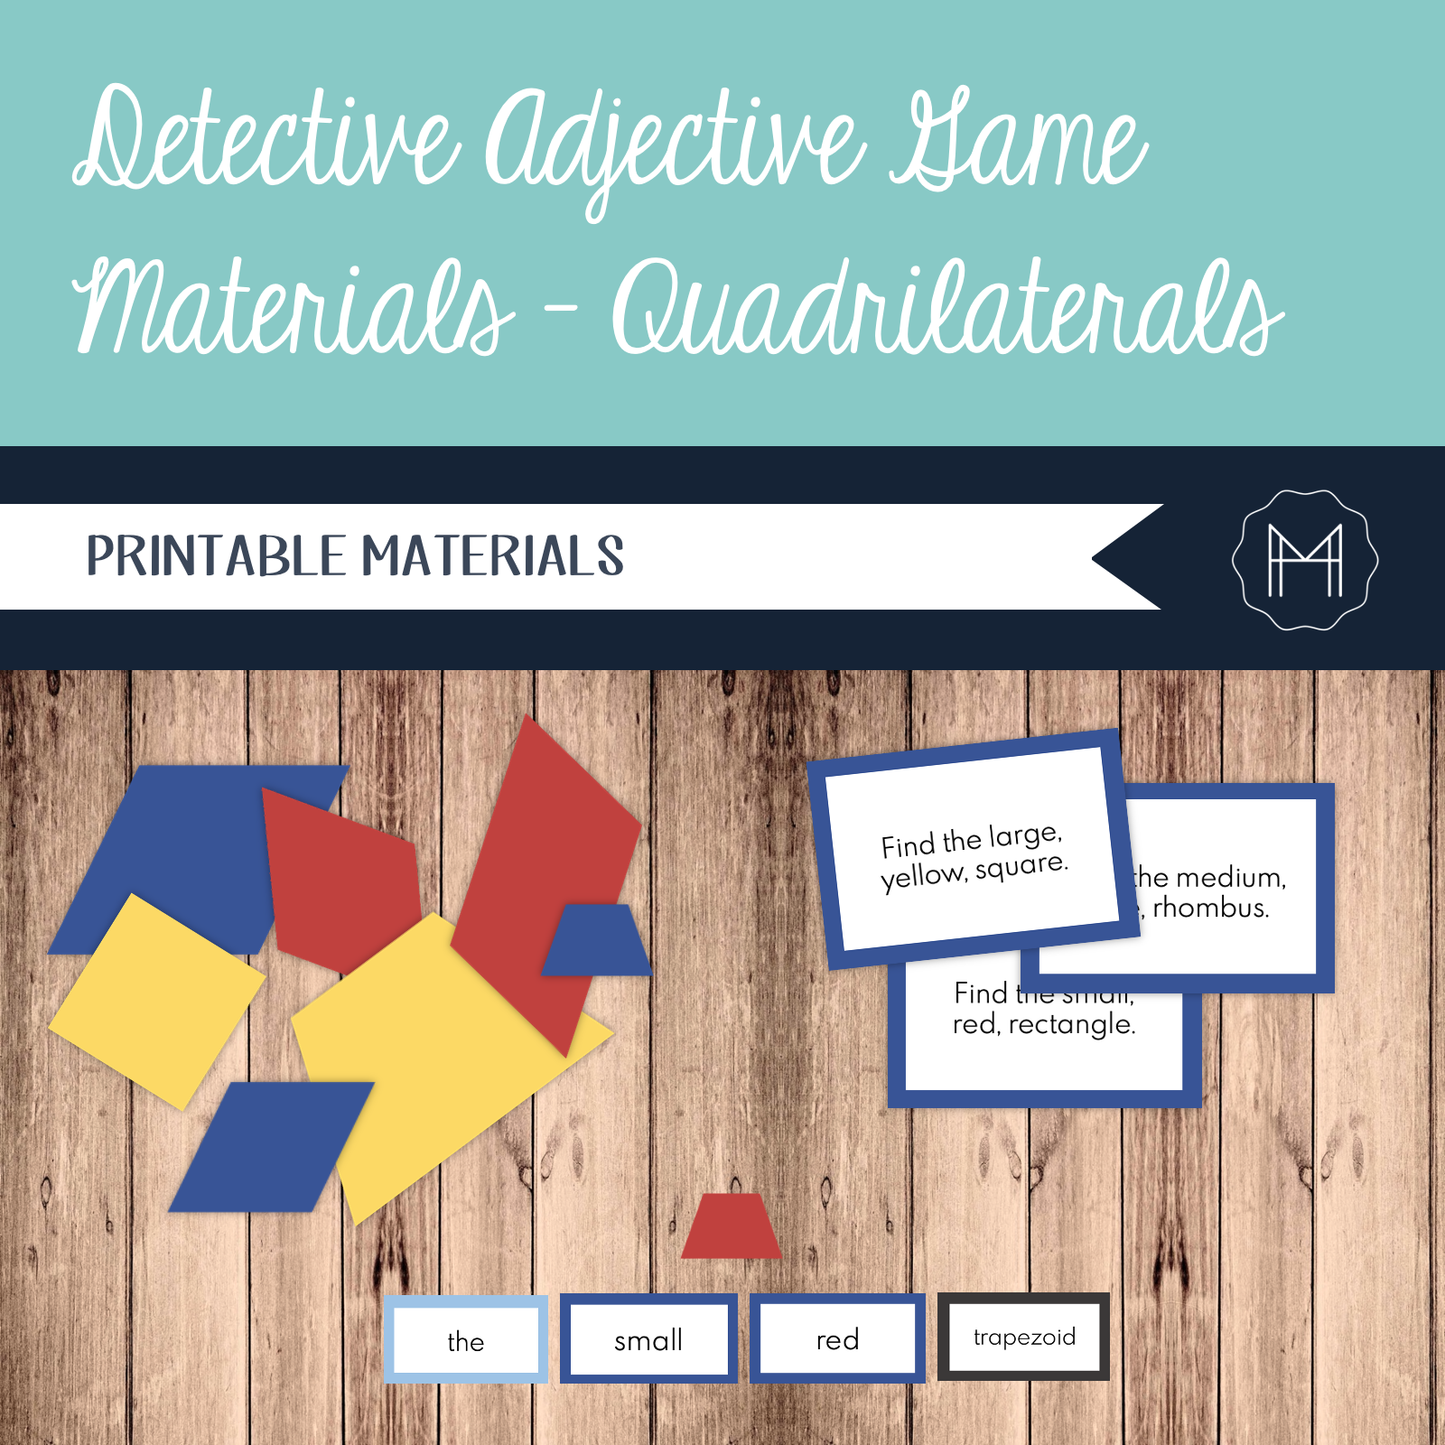 The Detective Adjective Game- Quadrilaterals